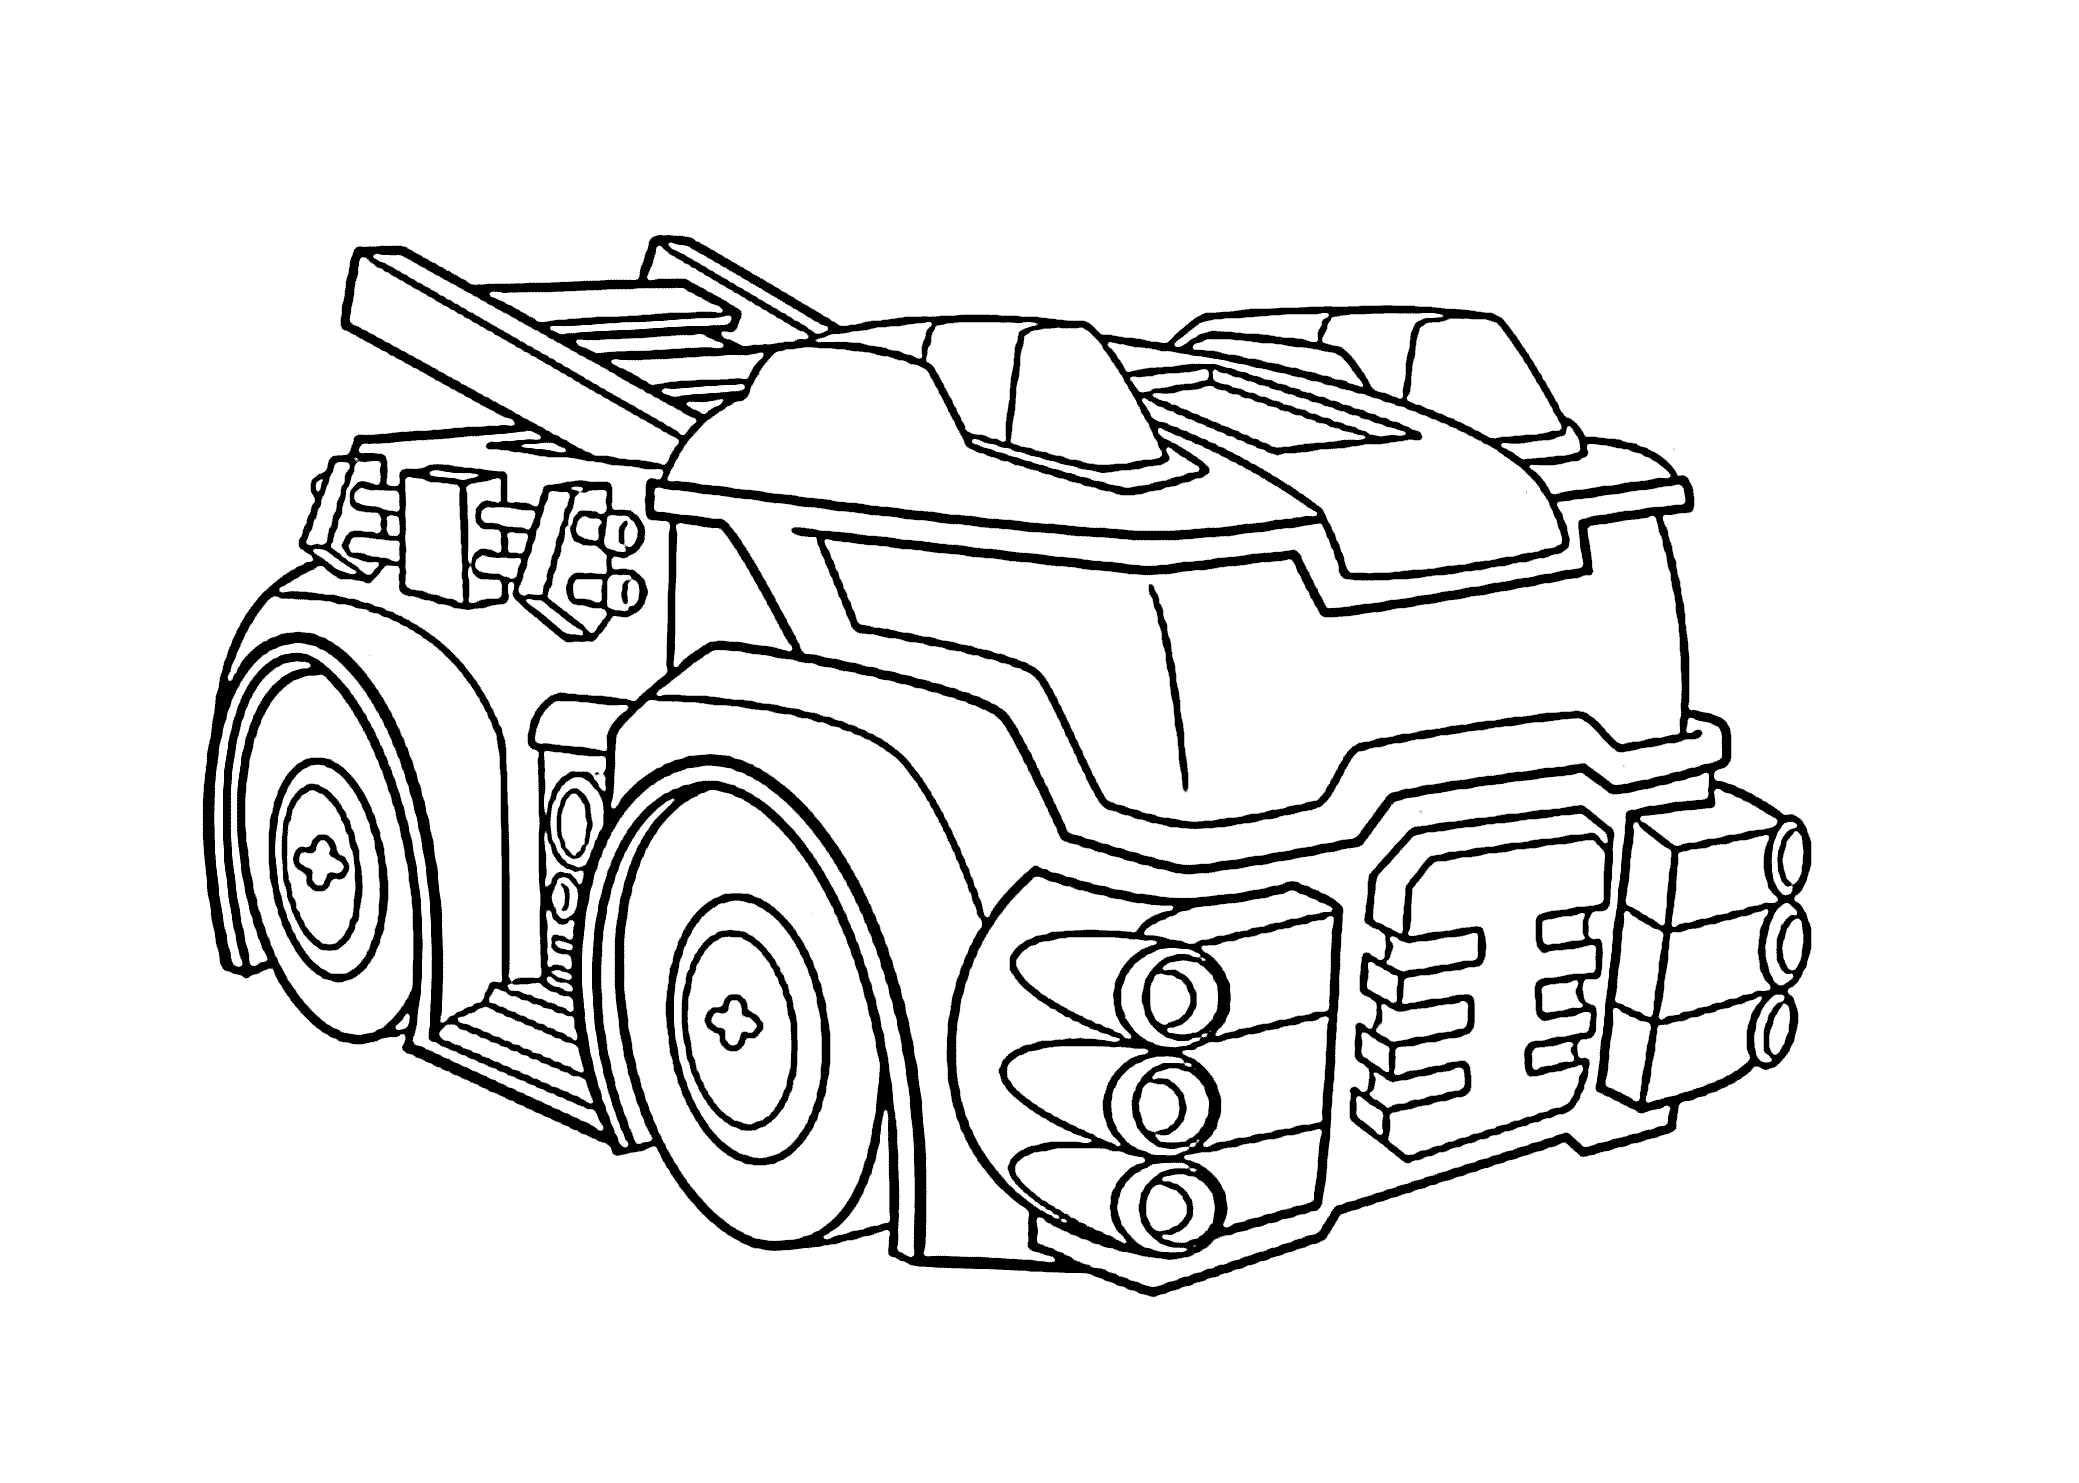 Heatwave The Fire Bot Rescue Bots Coloring Page